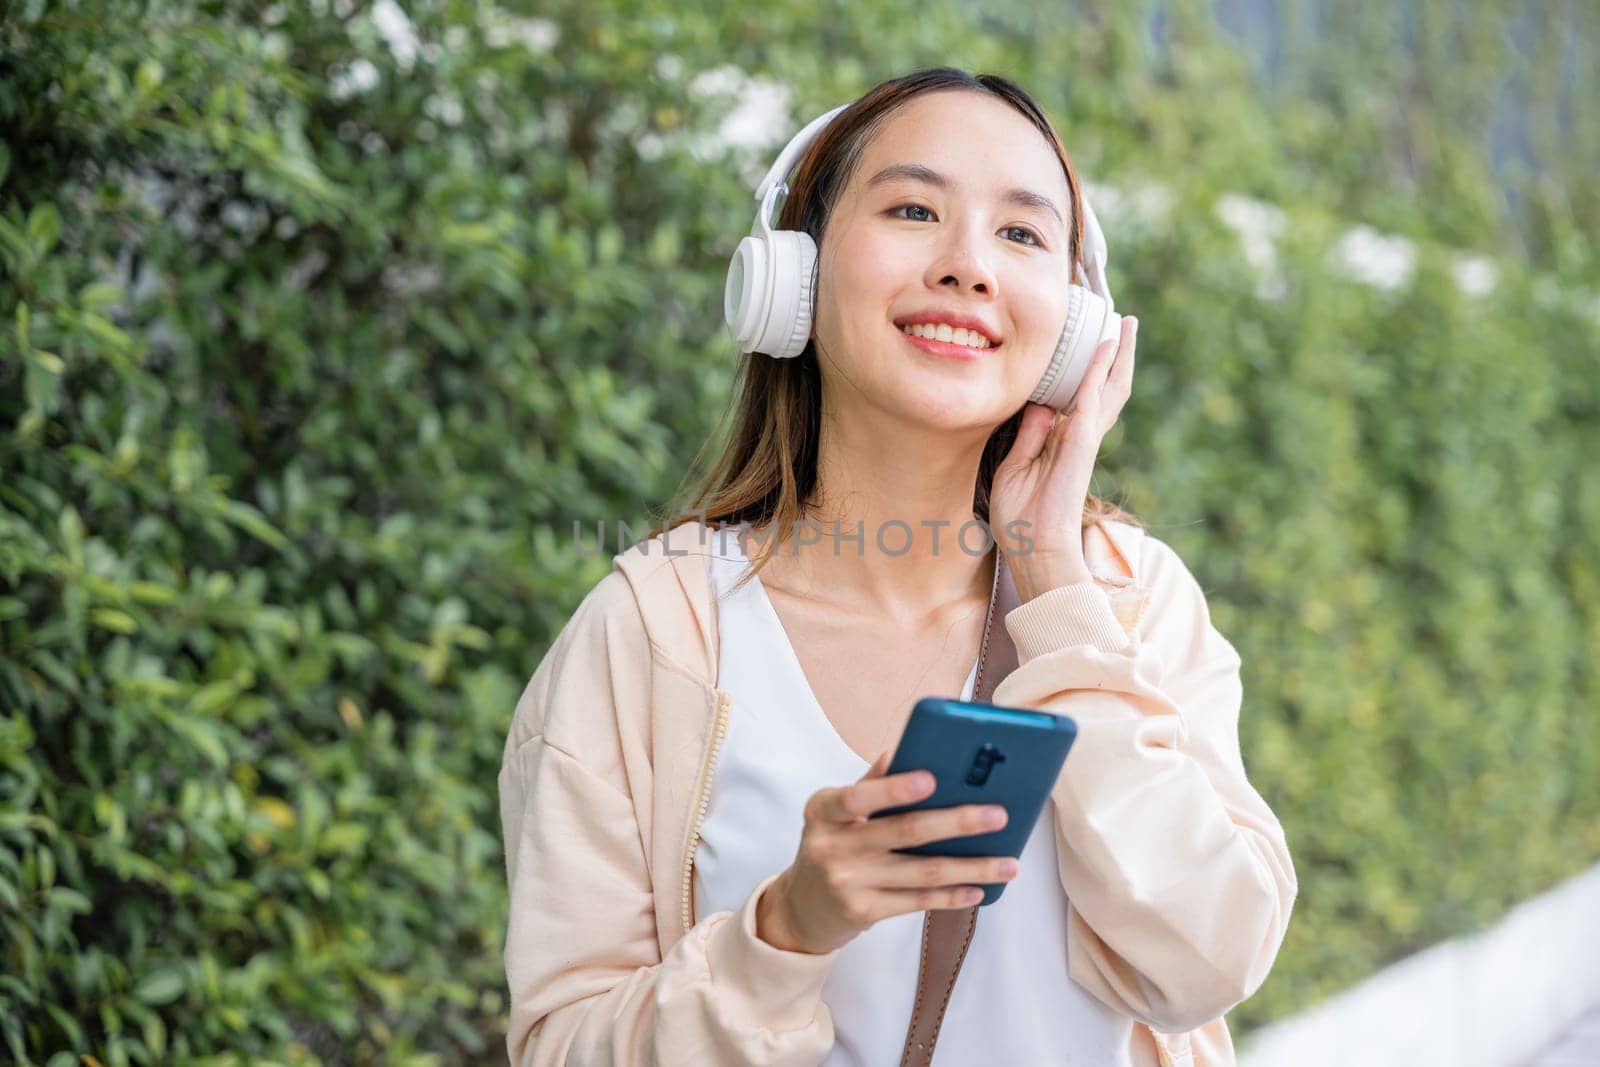 A cheerful young woman dancing with wireless headphones immerses herself in joy of choosing and listening to her favorite energetic music outdoors in the urban city garden. season beauty is evident.